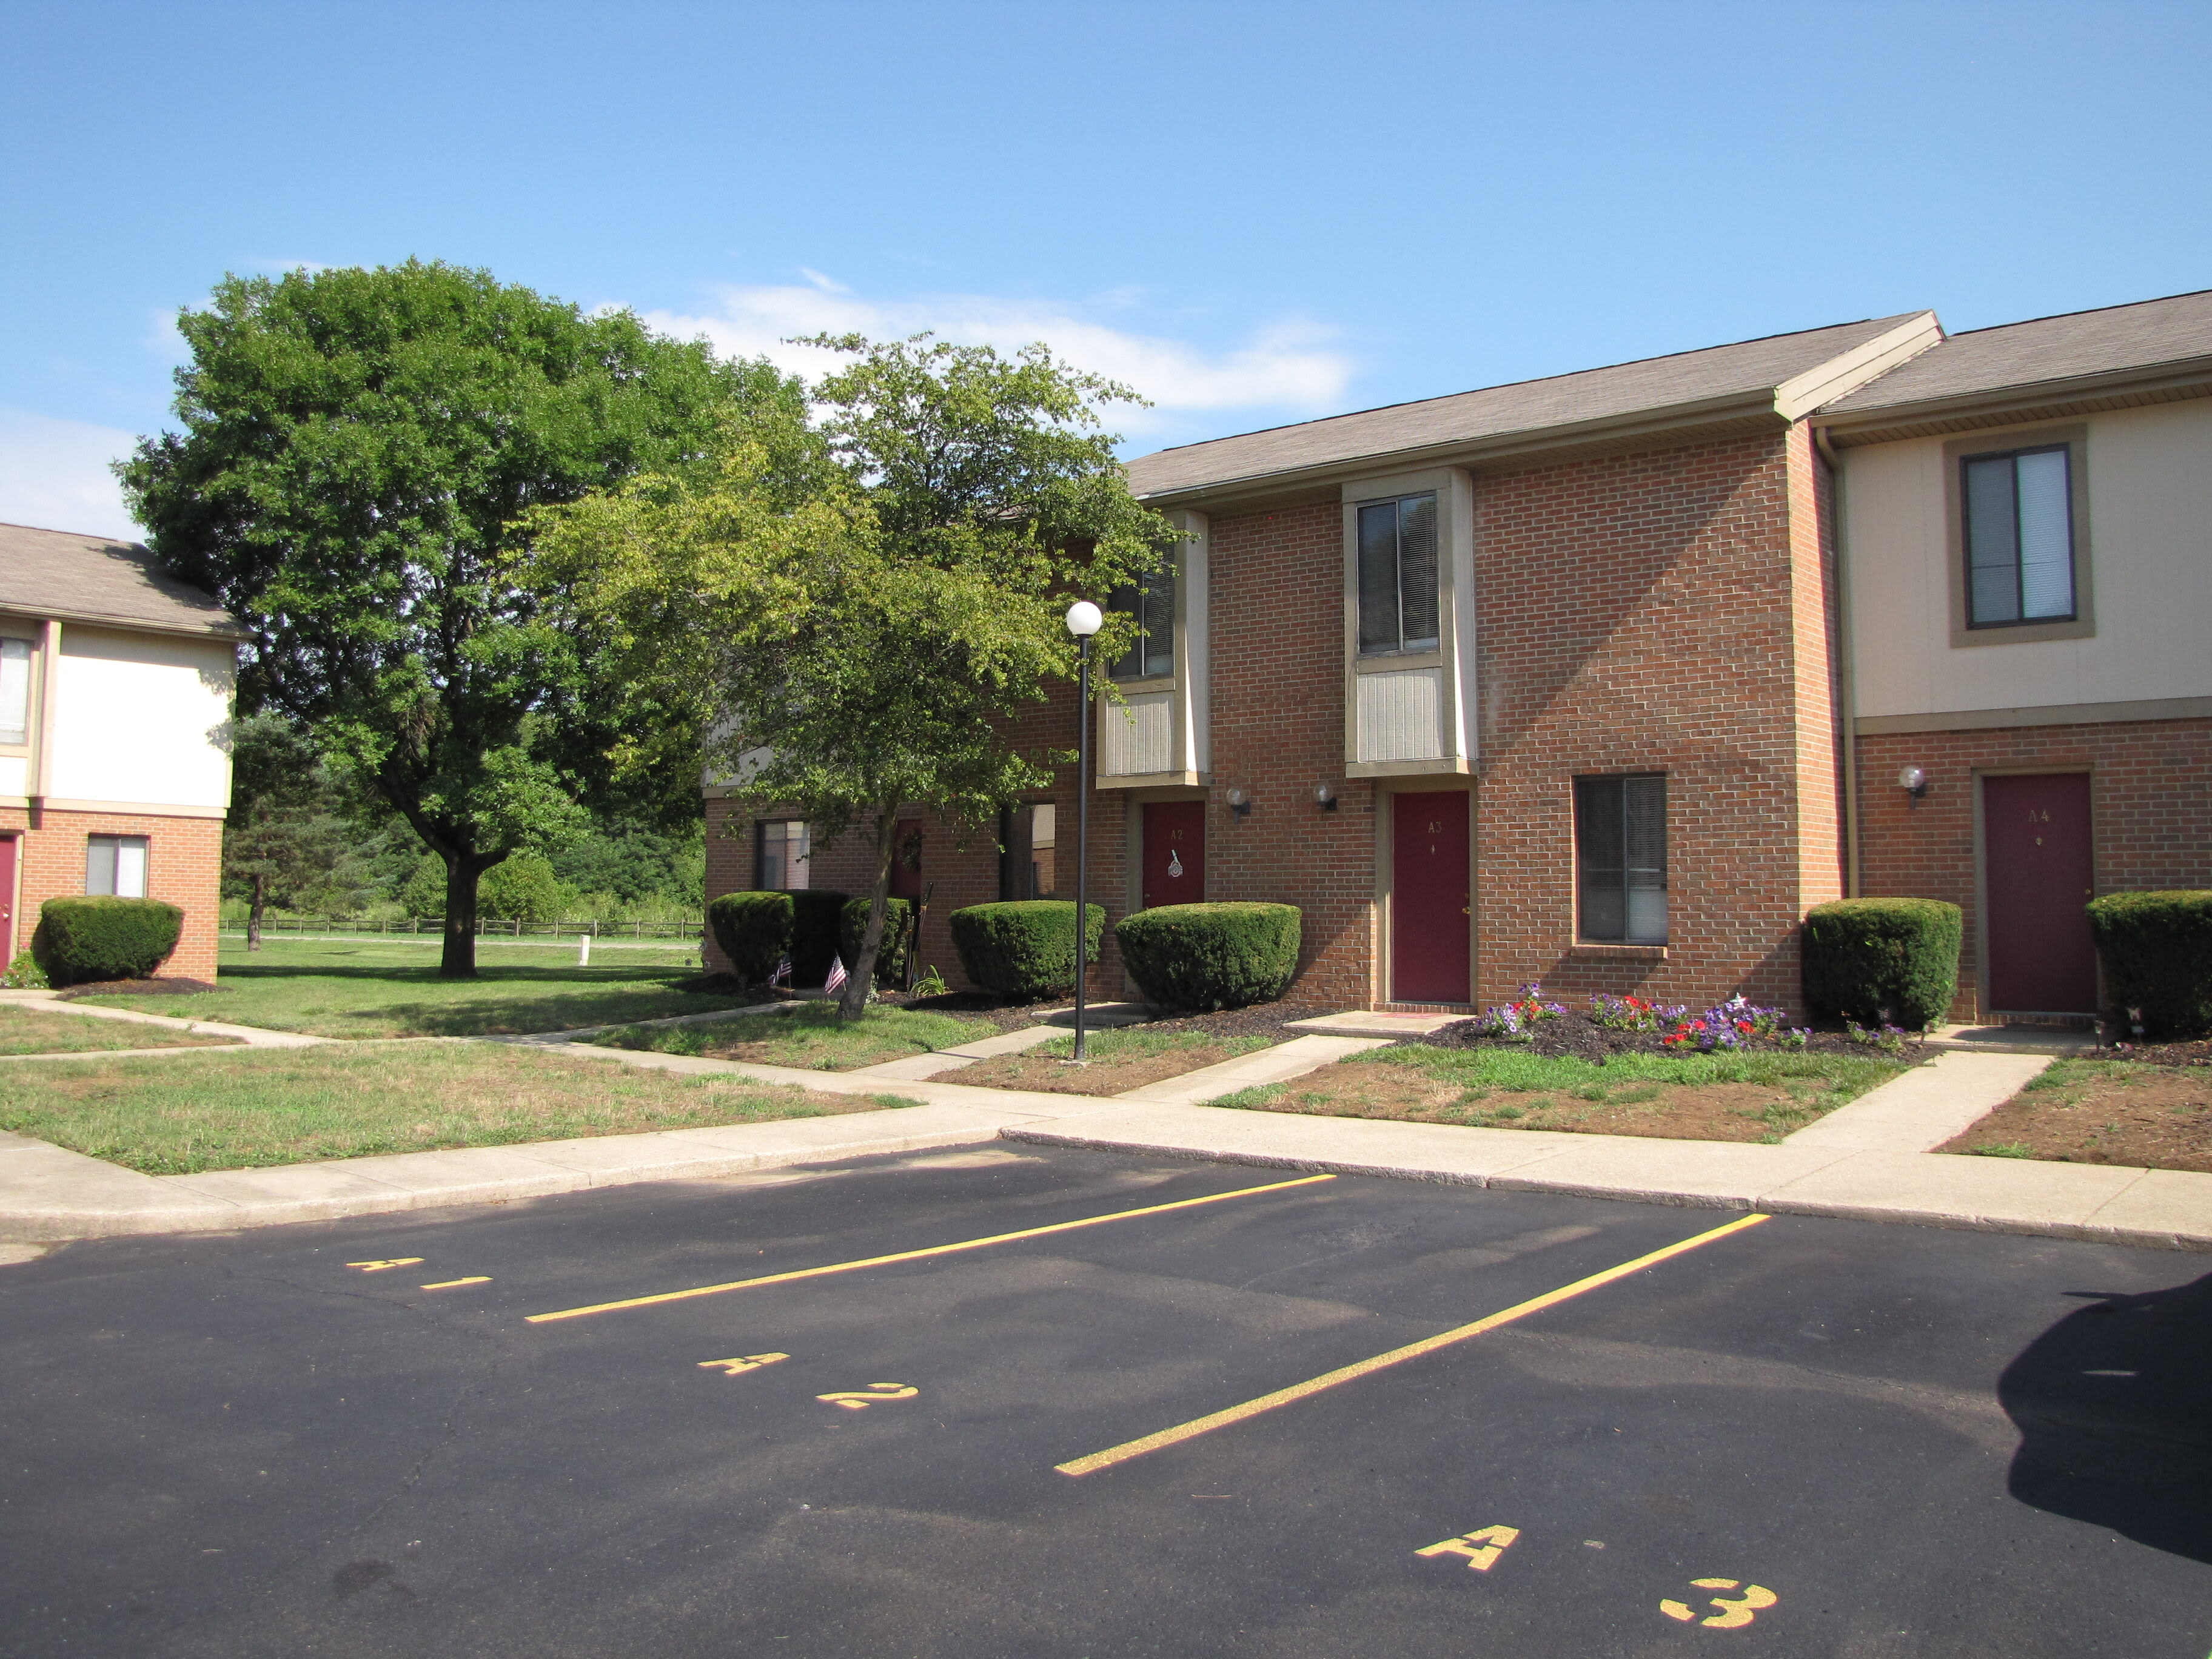 Street view of the apartments at North River Place in Chillicothe, Ohio